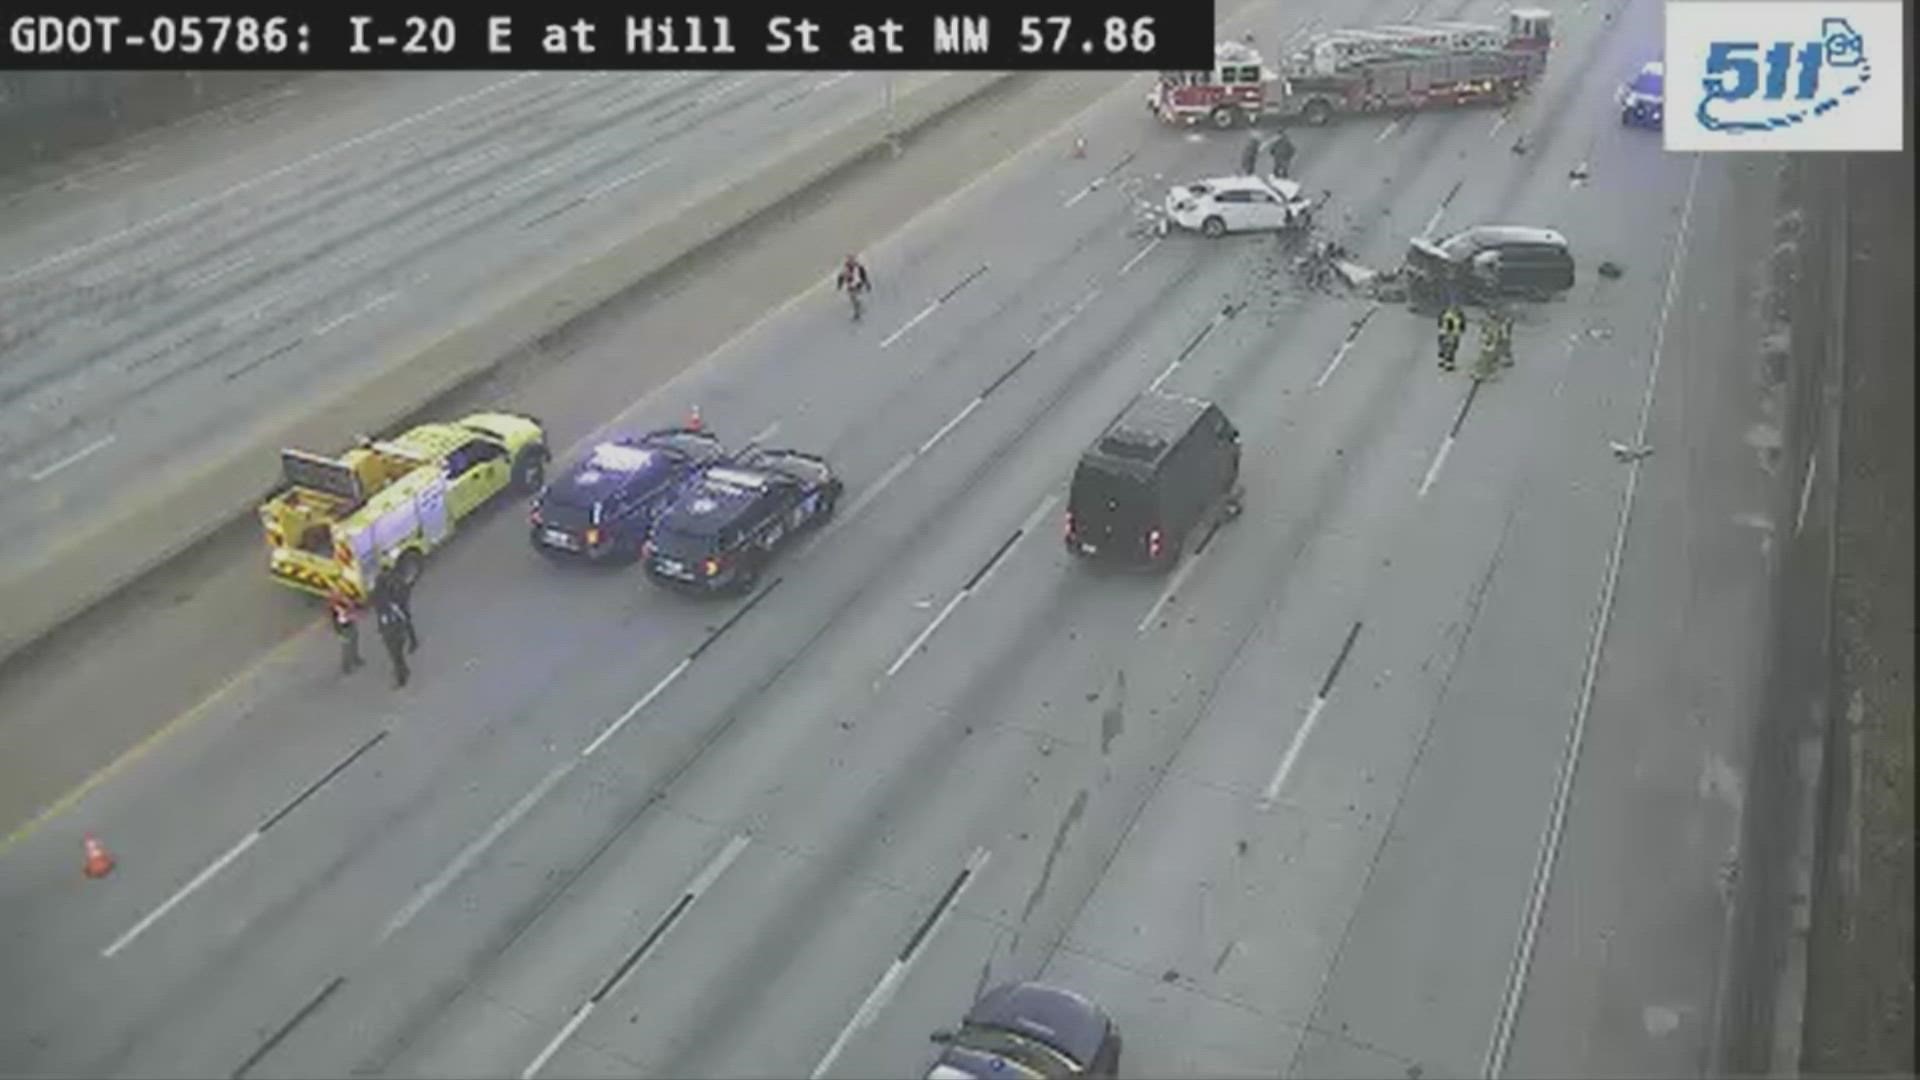 GDOT cameras show several medical and fire officials at the scene.